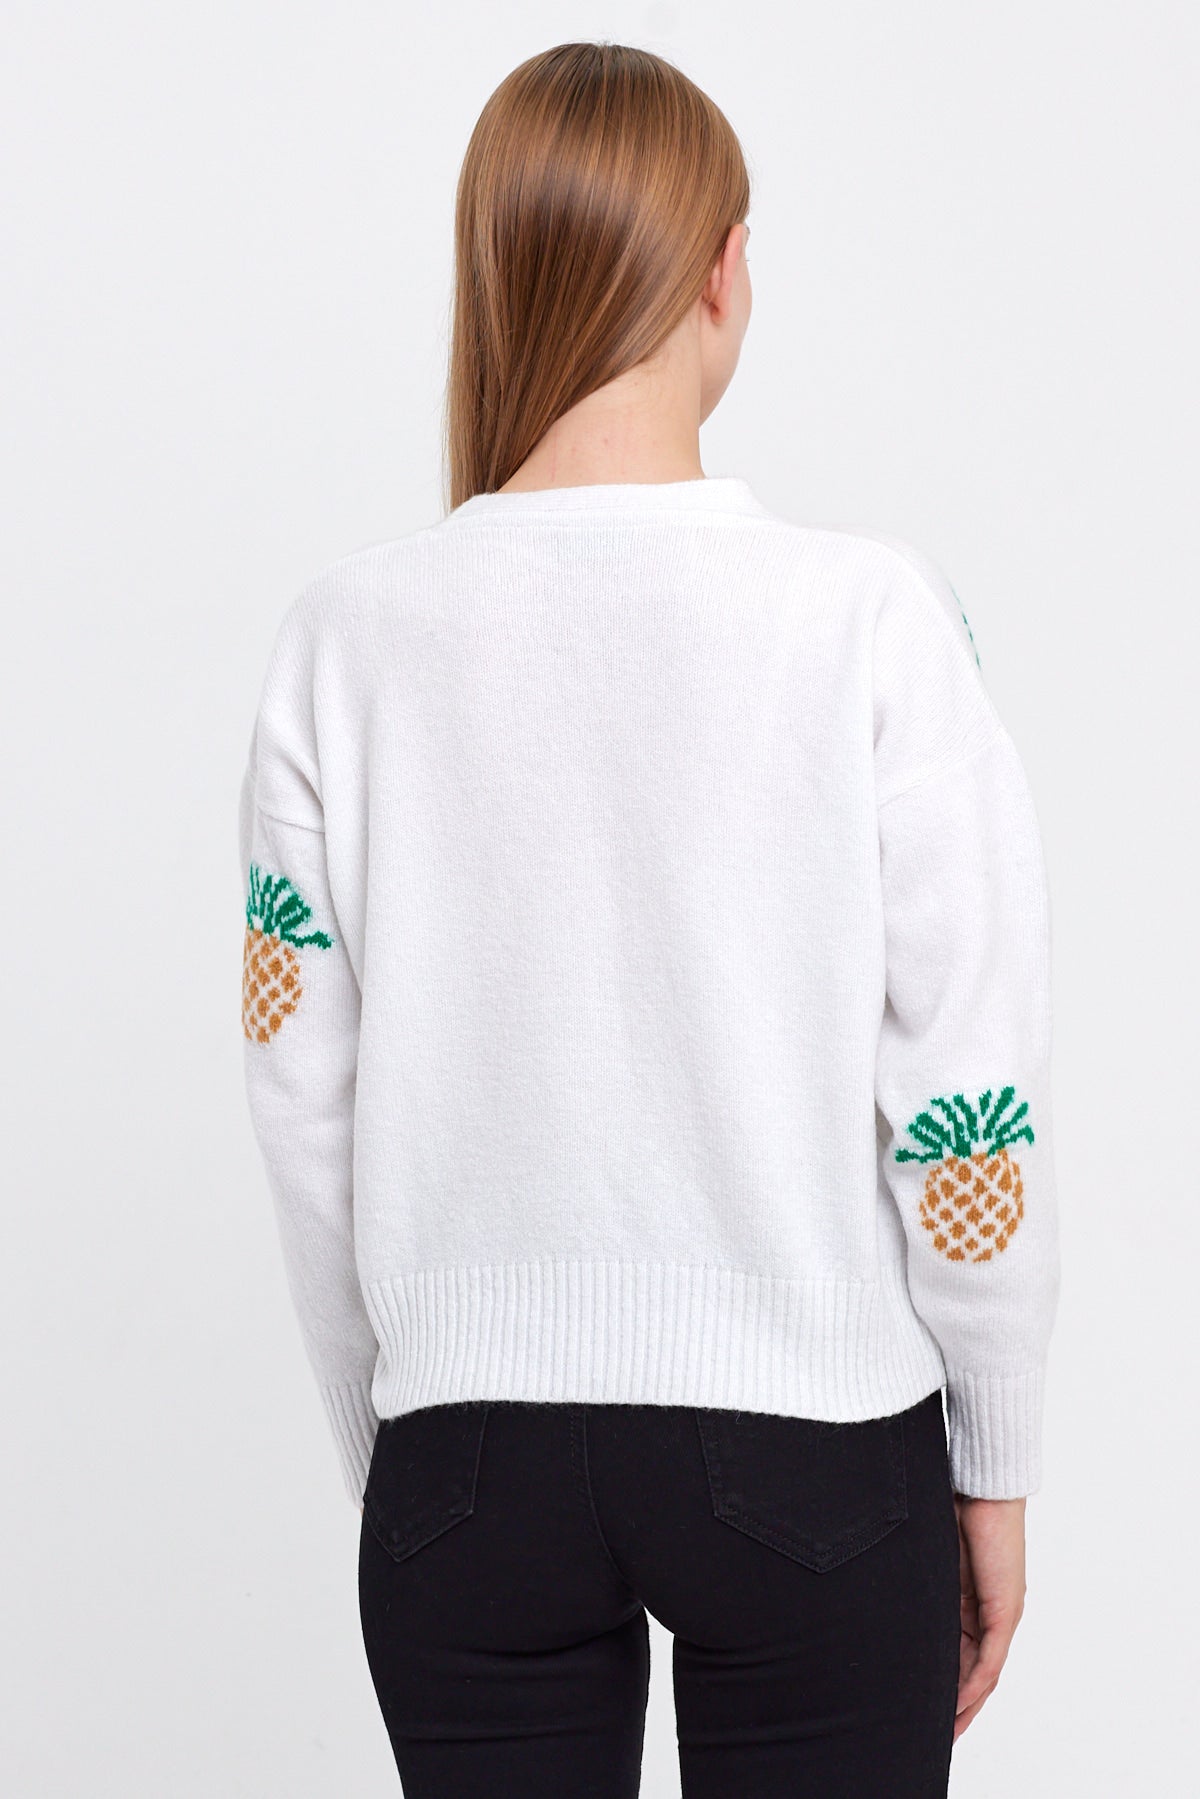 Pineapple Knit Cardigan Cropped - Cute Collection